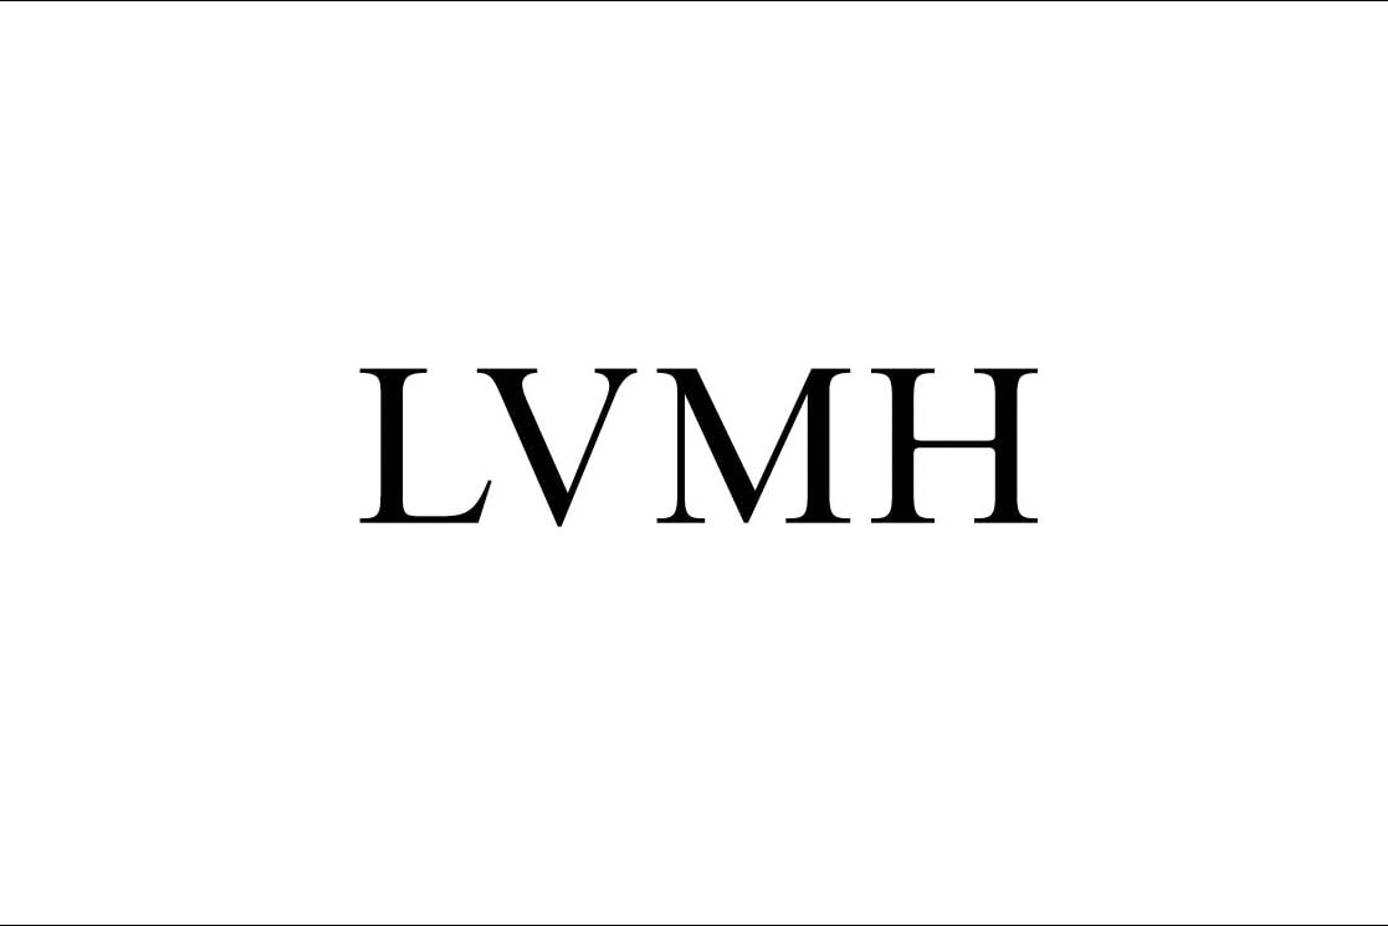 Competitive Stategies of LVMH